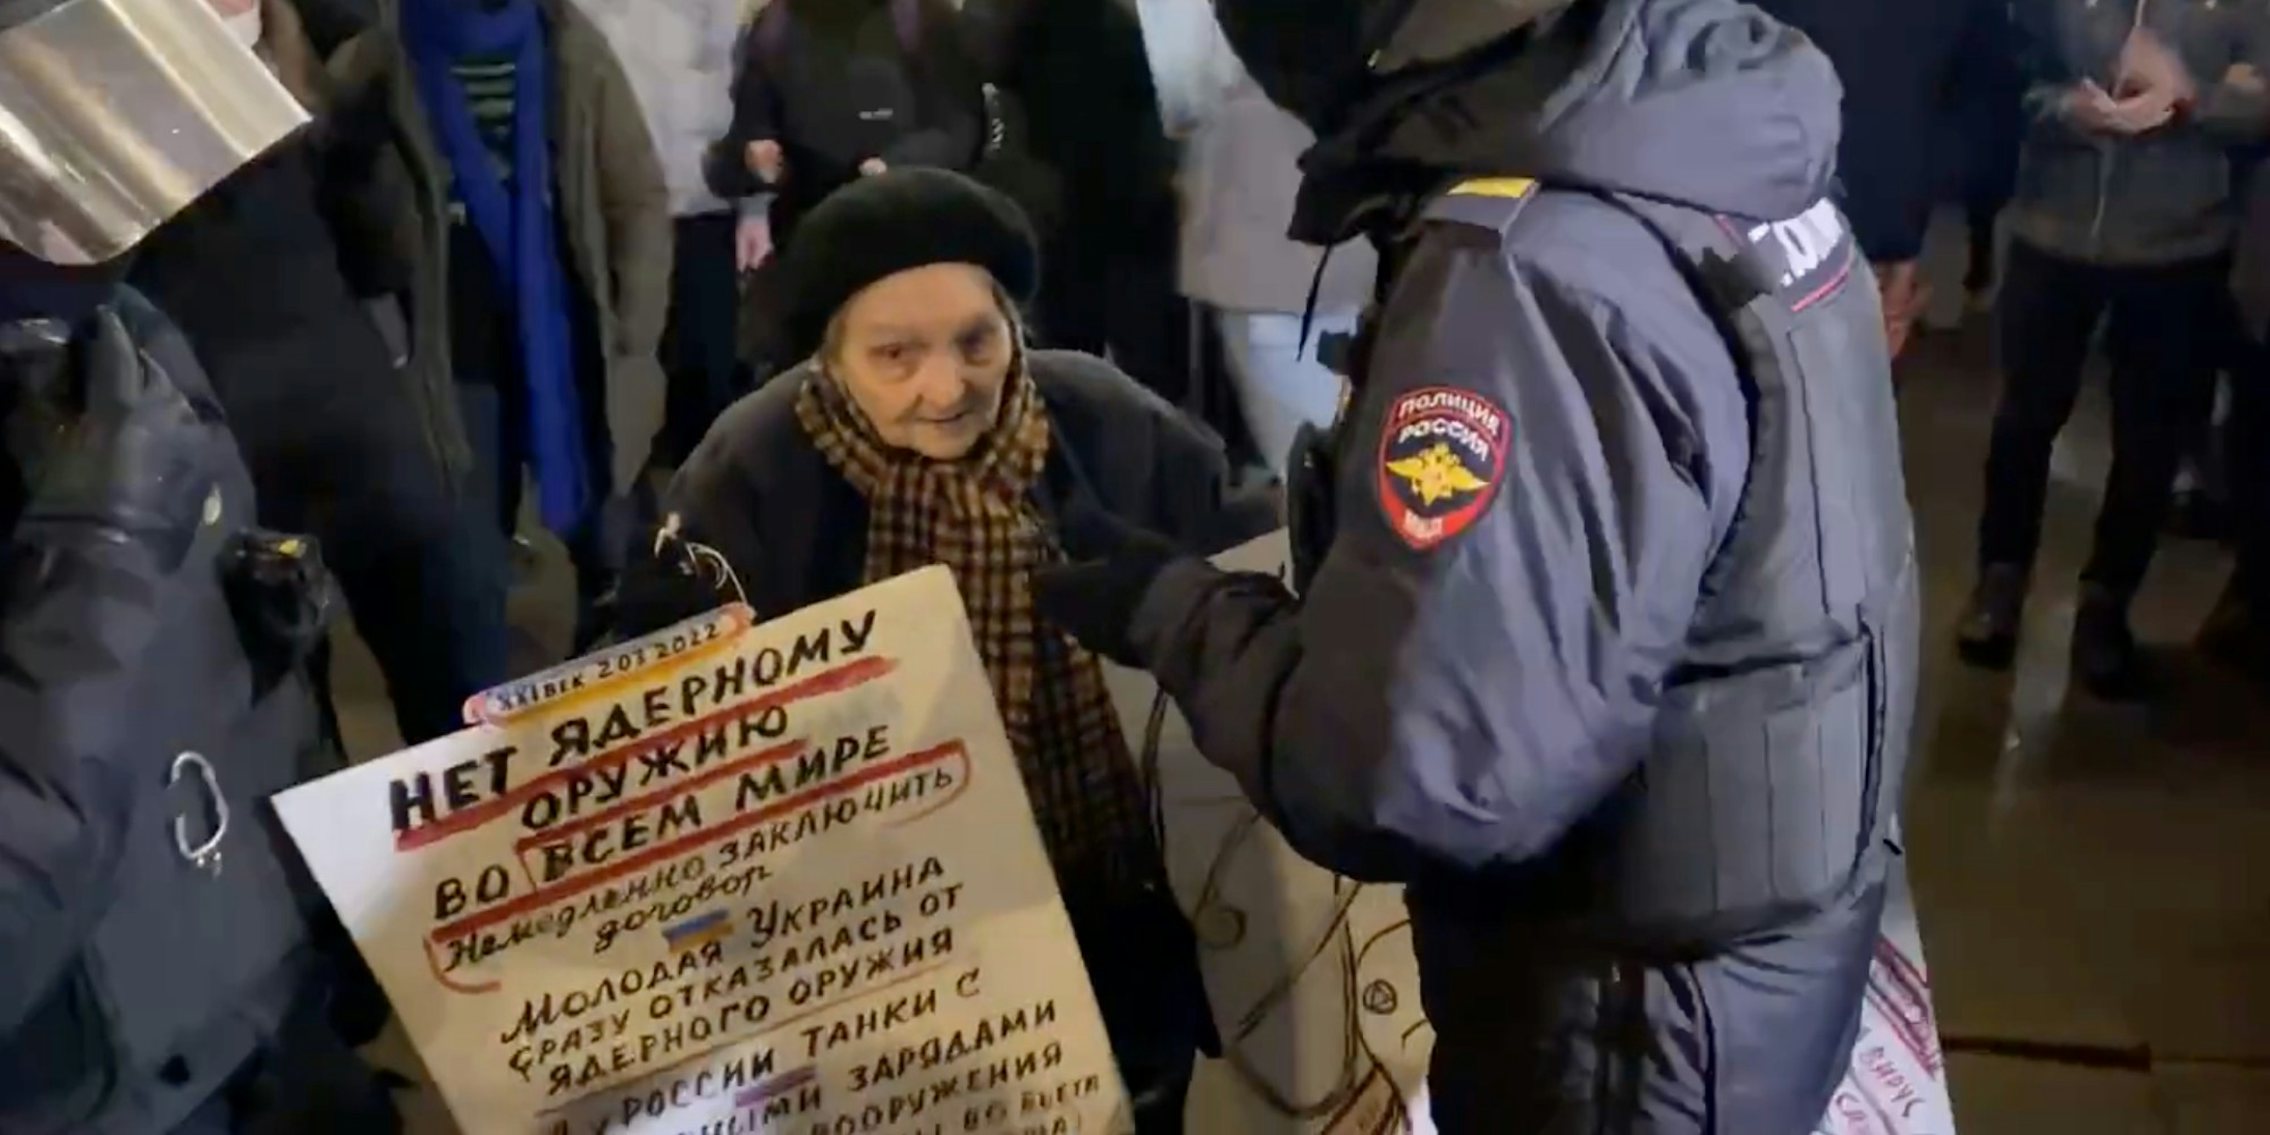 An elderly Russian woman confronted by police